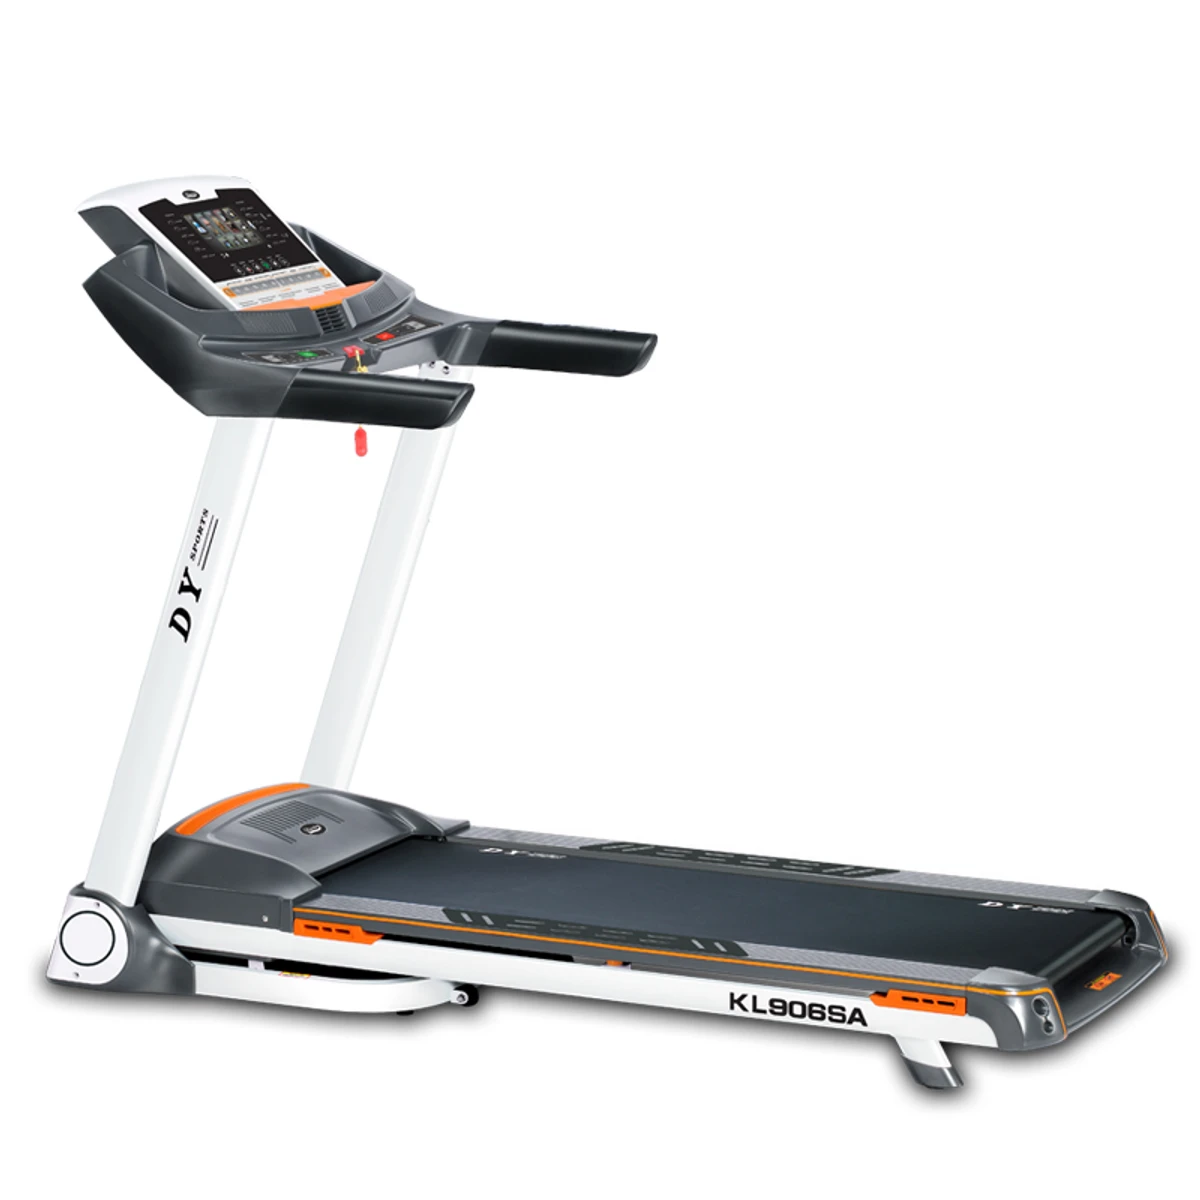 Daily youth KL906SA Android Intelligent Motorized Treadmill